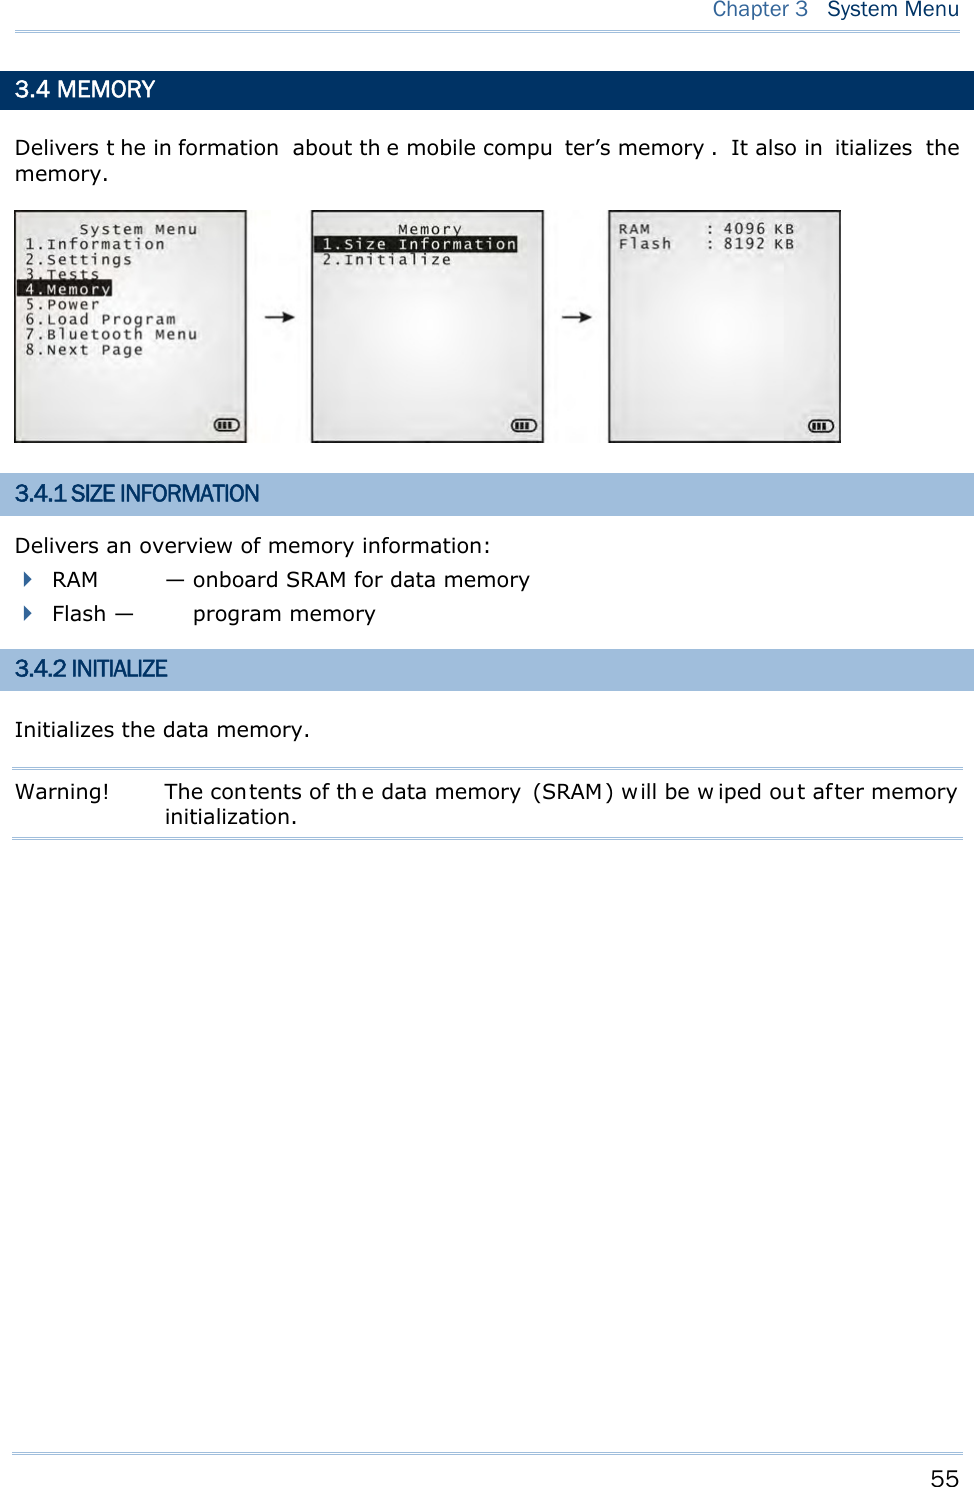     55   Chapter 3  System Menu  3.4 MEMORY Delivers t he in formation about th e mobile compu ter’s memory . It also in itializes the memory.  3.4.1 SIZE INFORMATION Delivers an overview of memory information:  RAM  — onboard SRAM for data memory  Flash — program memory 3.4.2 INITIALIZE Initializes the data memory. Warning!  The contents of th e data memory  (SRAM) will be w iped out af ter memory initialization.        